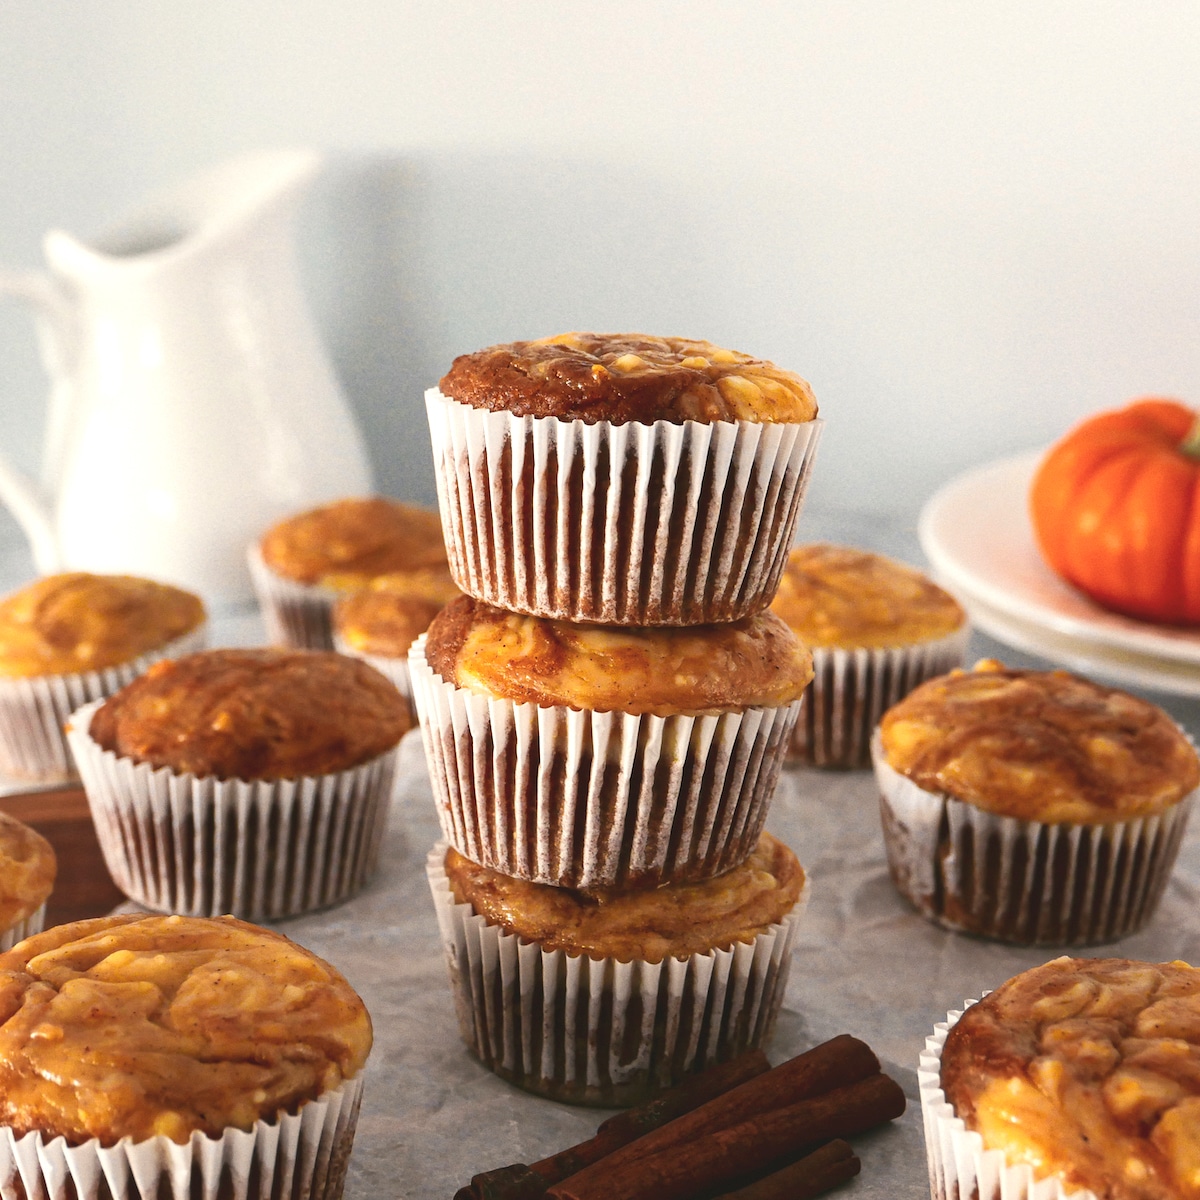 pumpkin muffins arranged on a table with milk pitcher in background.